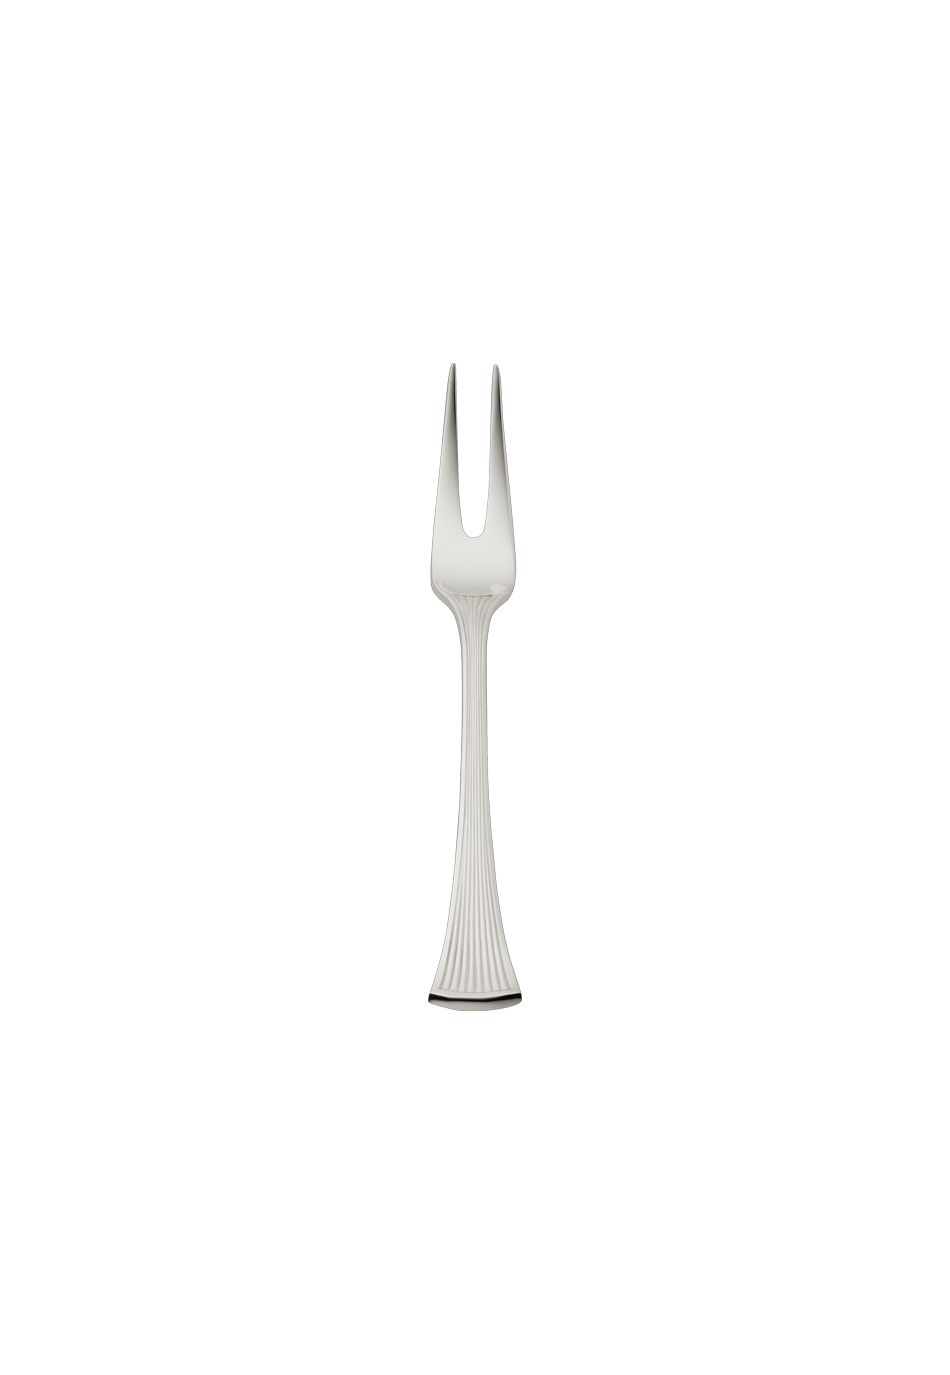 Avenue Meat Fork, small (150g massive silverplated)